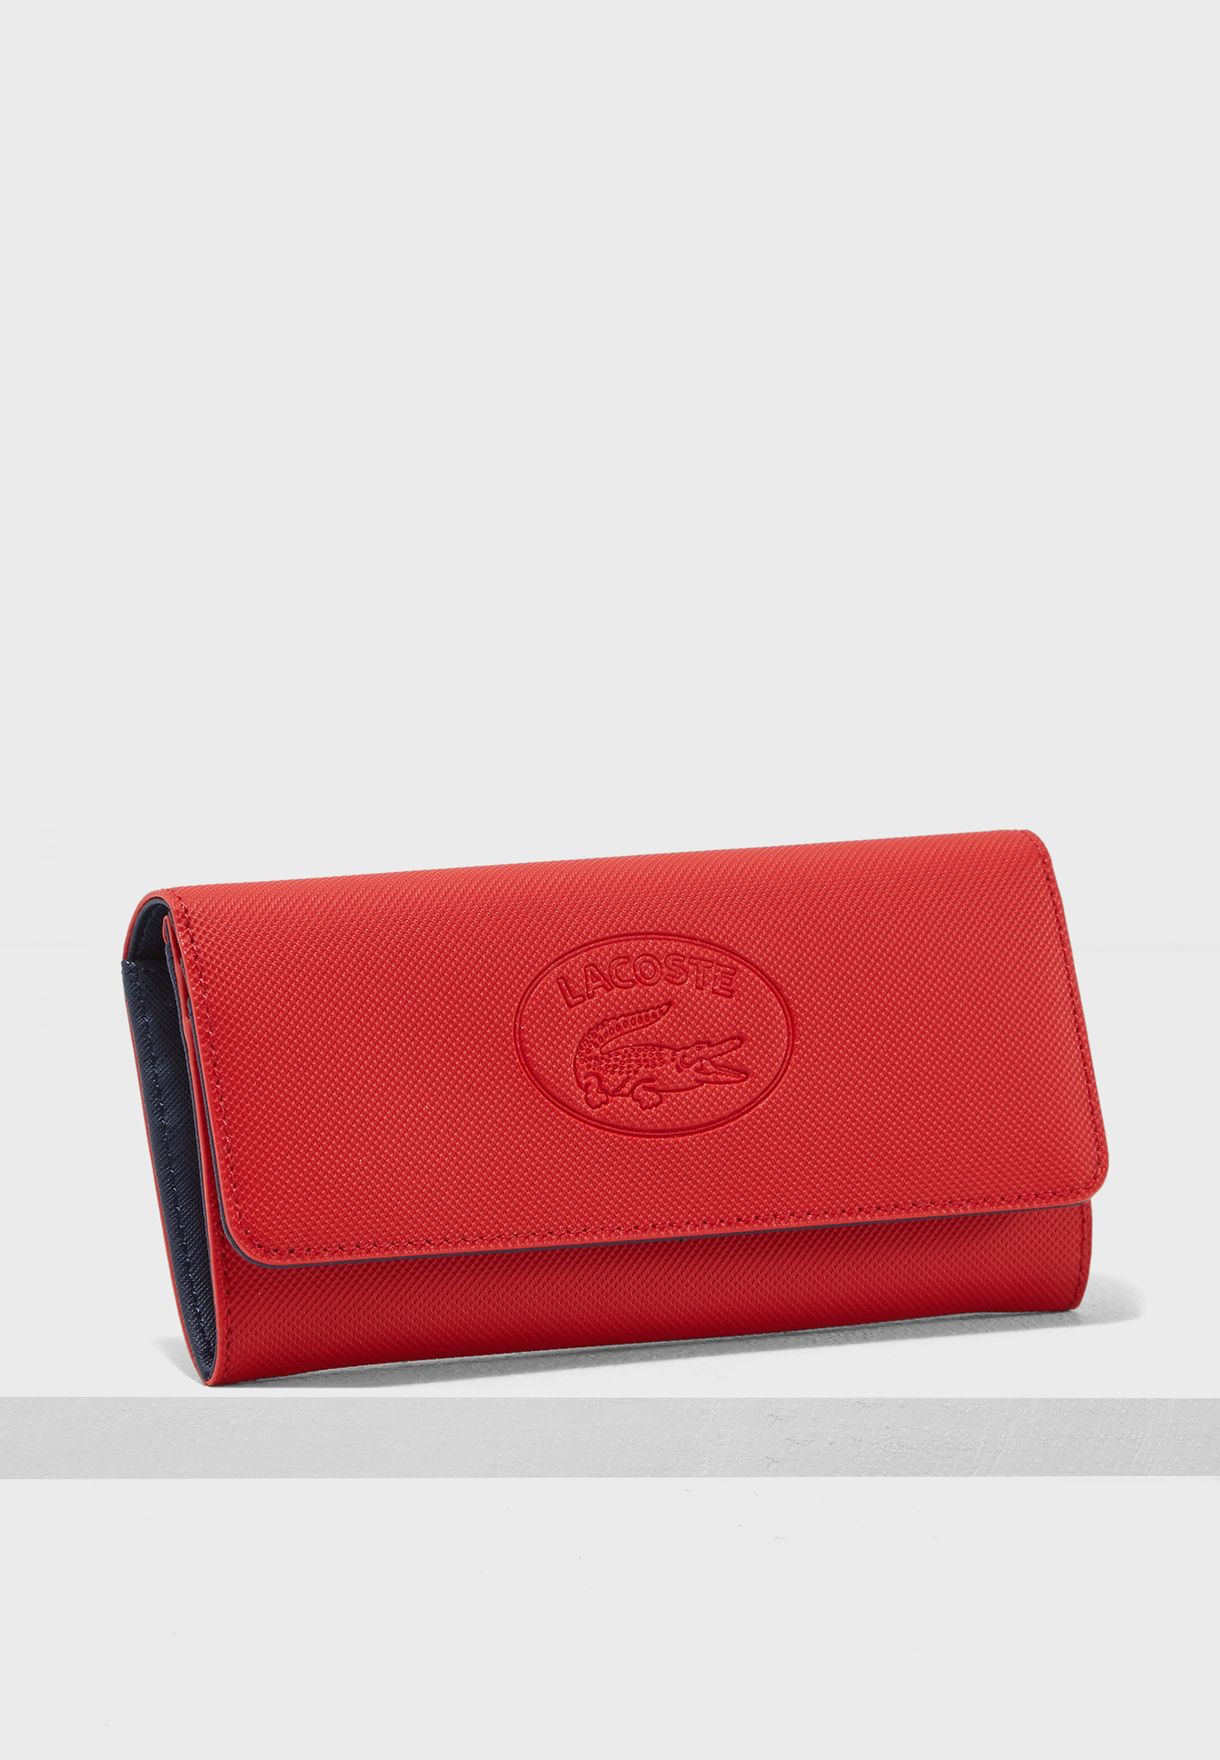 lacoste red purse